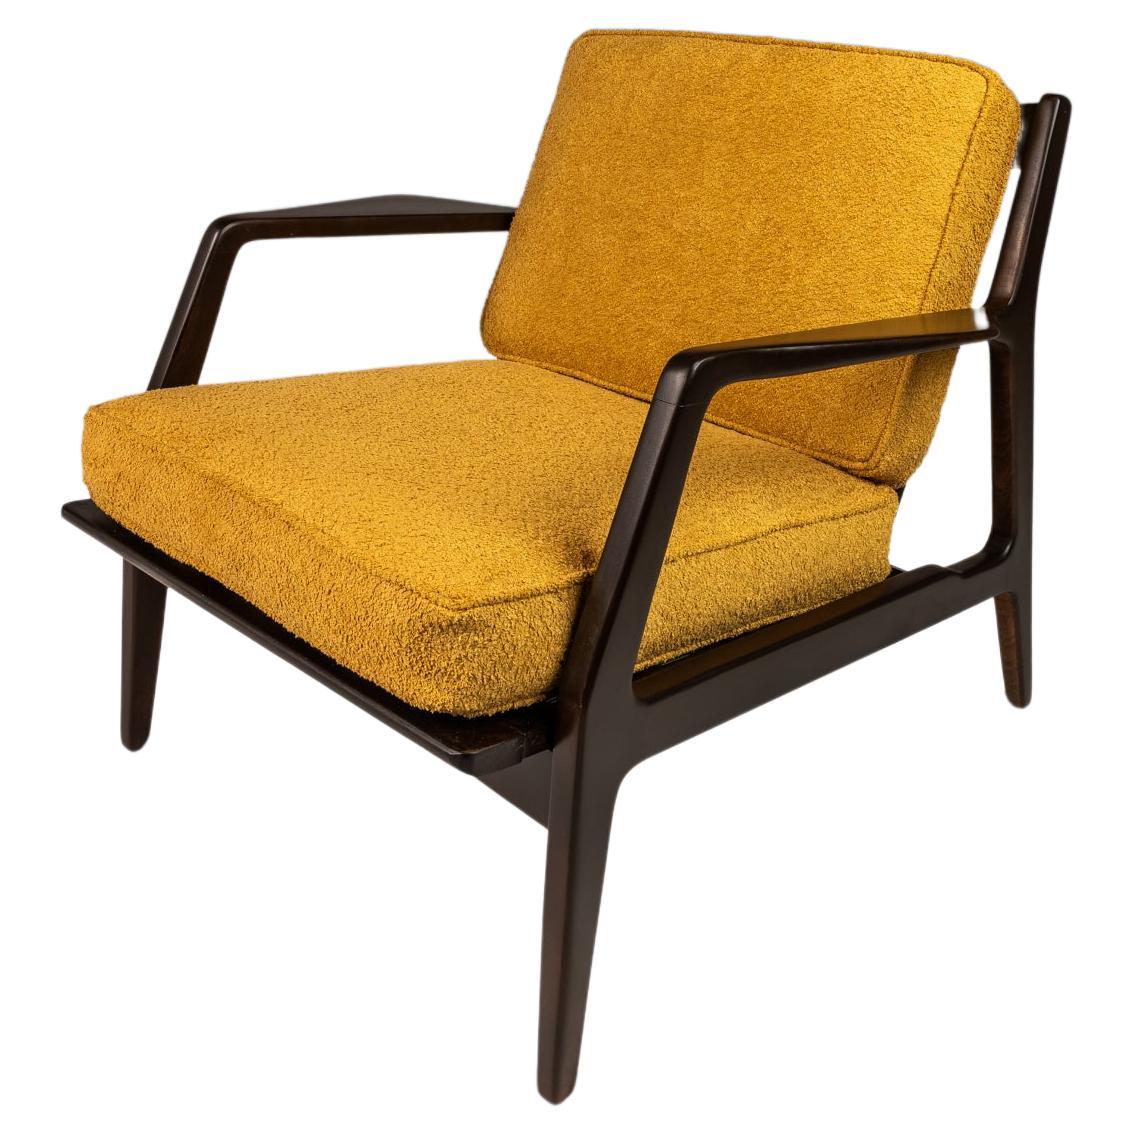 Model 596 Lounge Chair by Lawrence Peabody & Ib Kofod Larsen for Selig, c. 1950s